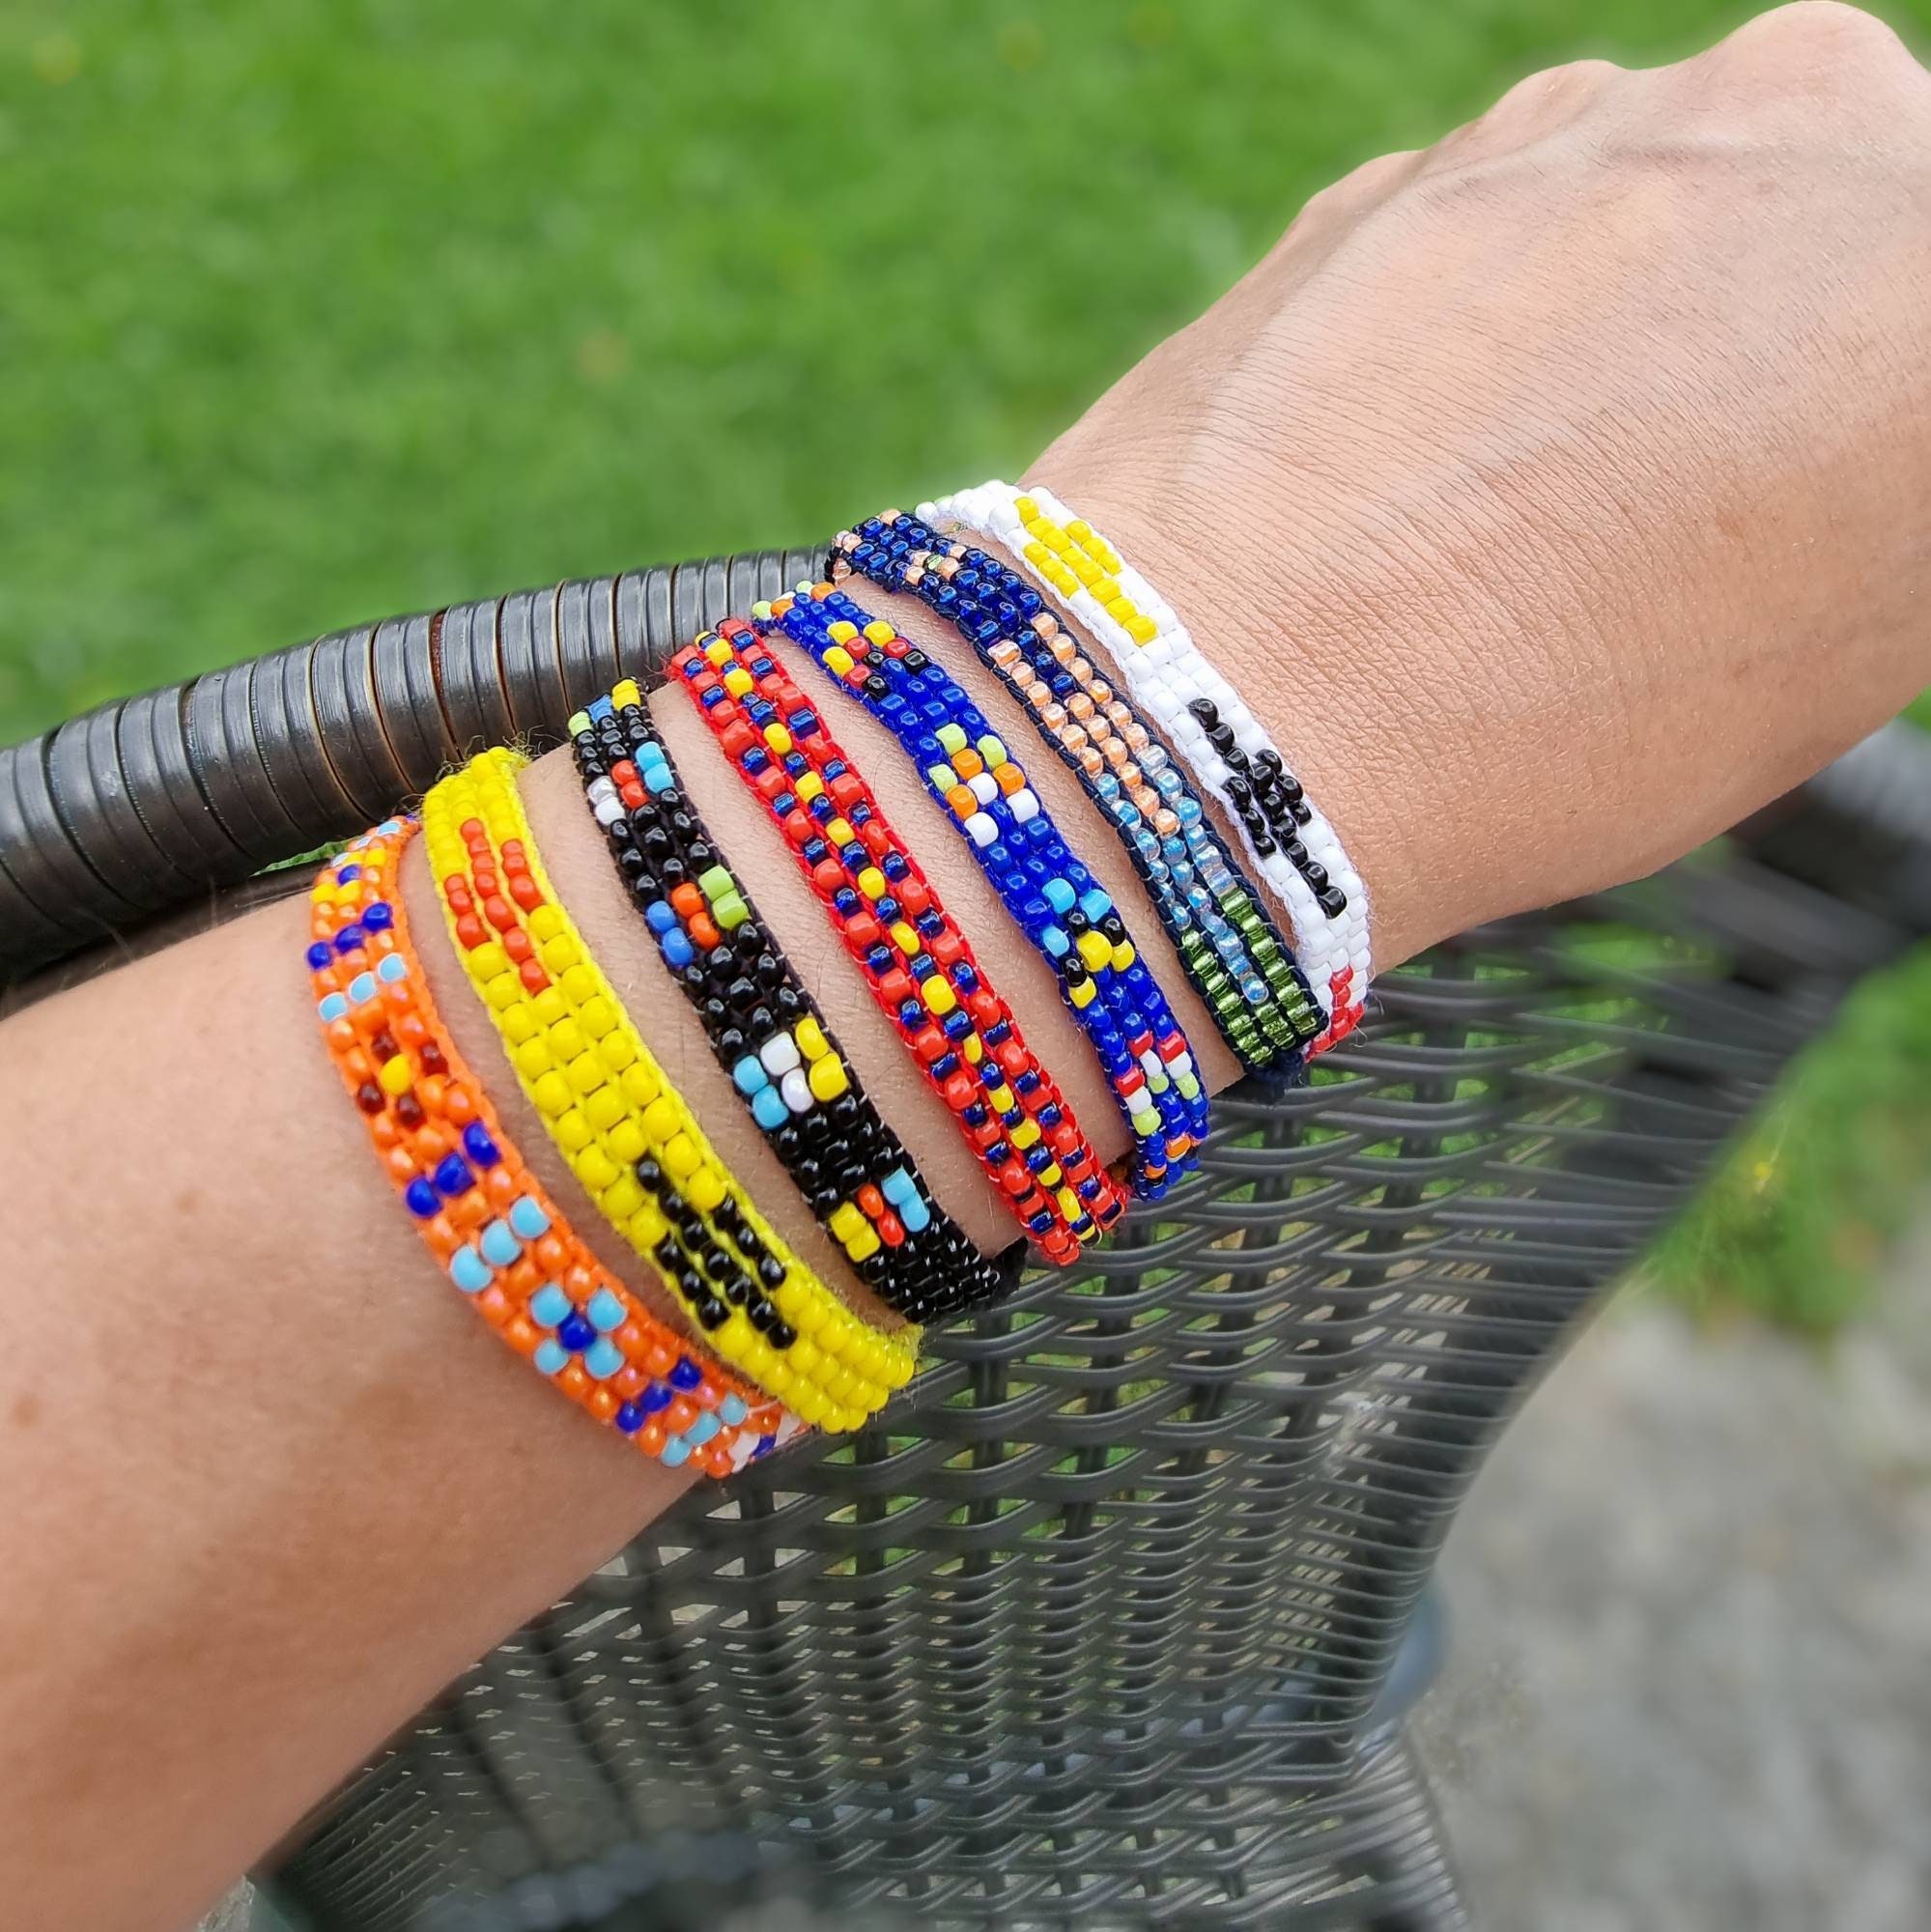 Handmade Bohemian Friendship Bracelet With Colorful Seed Seed Bead  Bracelets Charm Perfect For Women, Children, And Beach Parties From  Seaegerton, $11.33